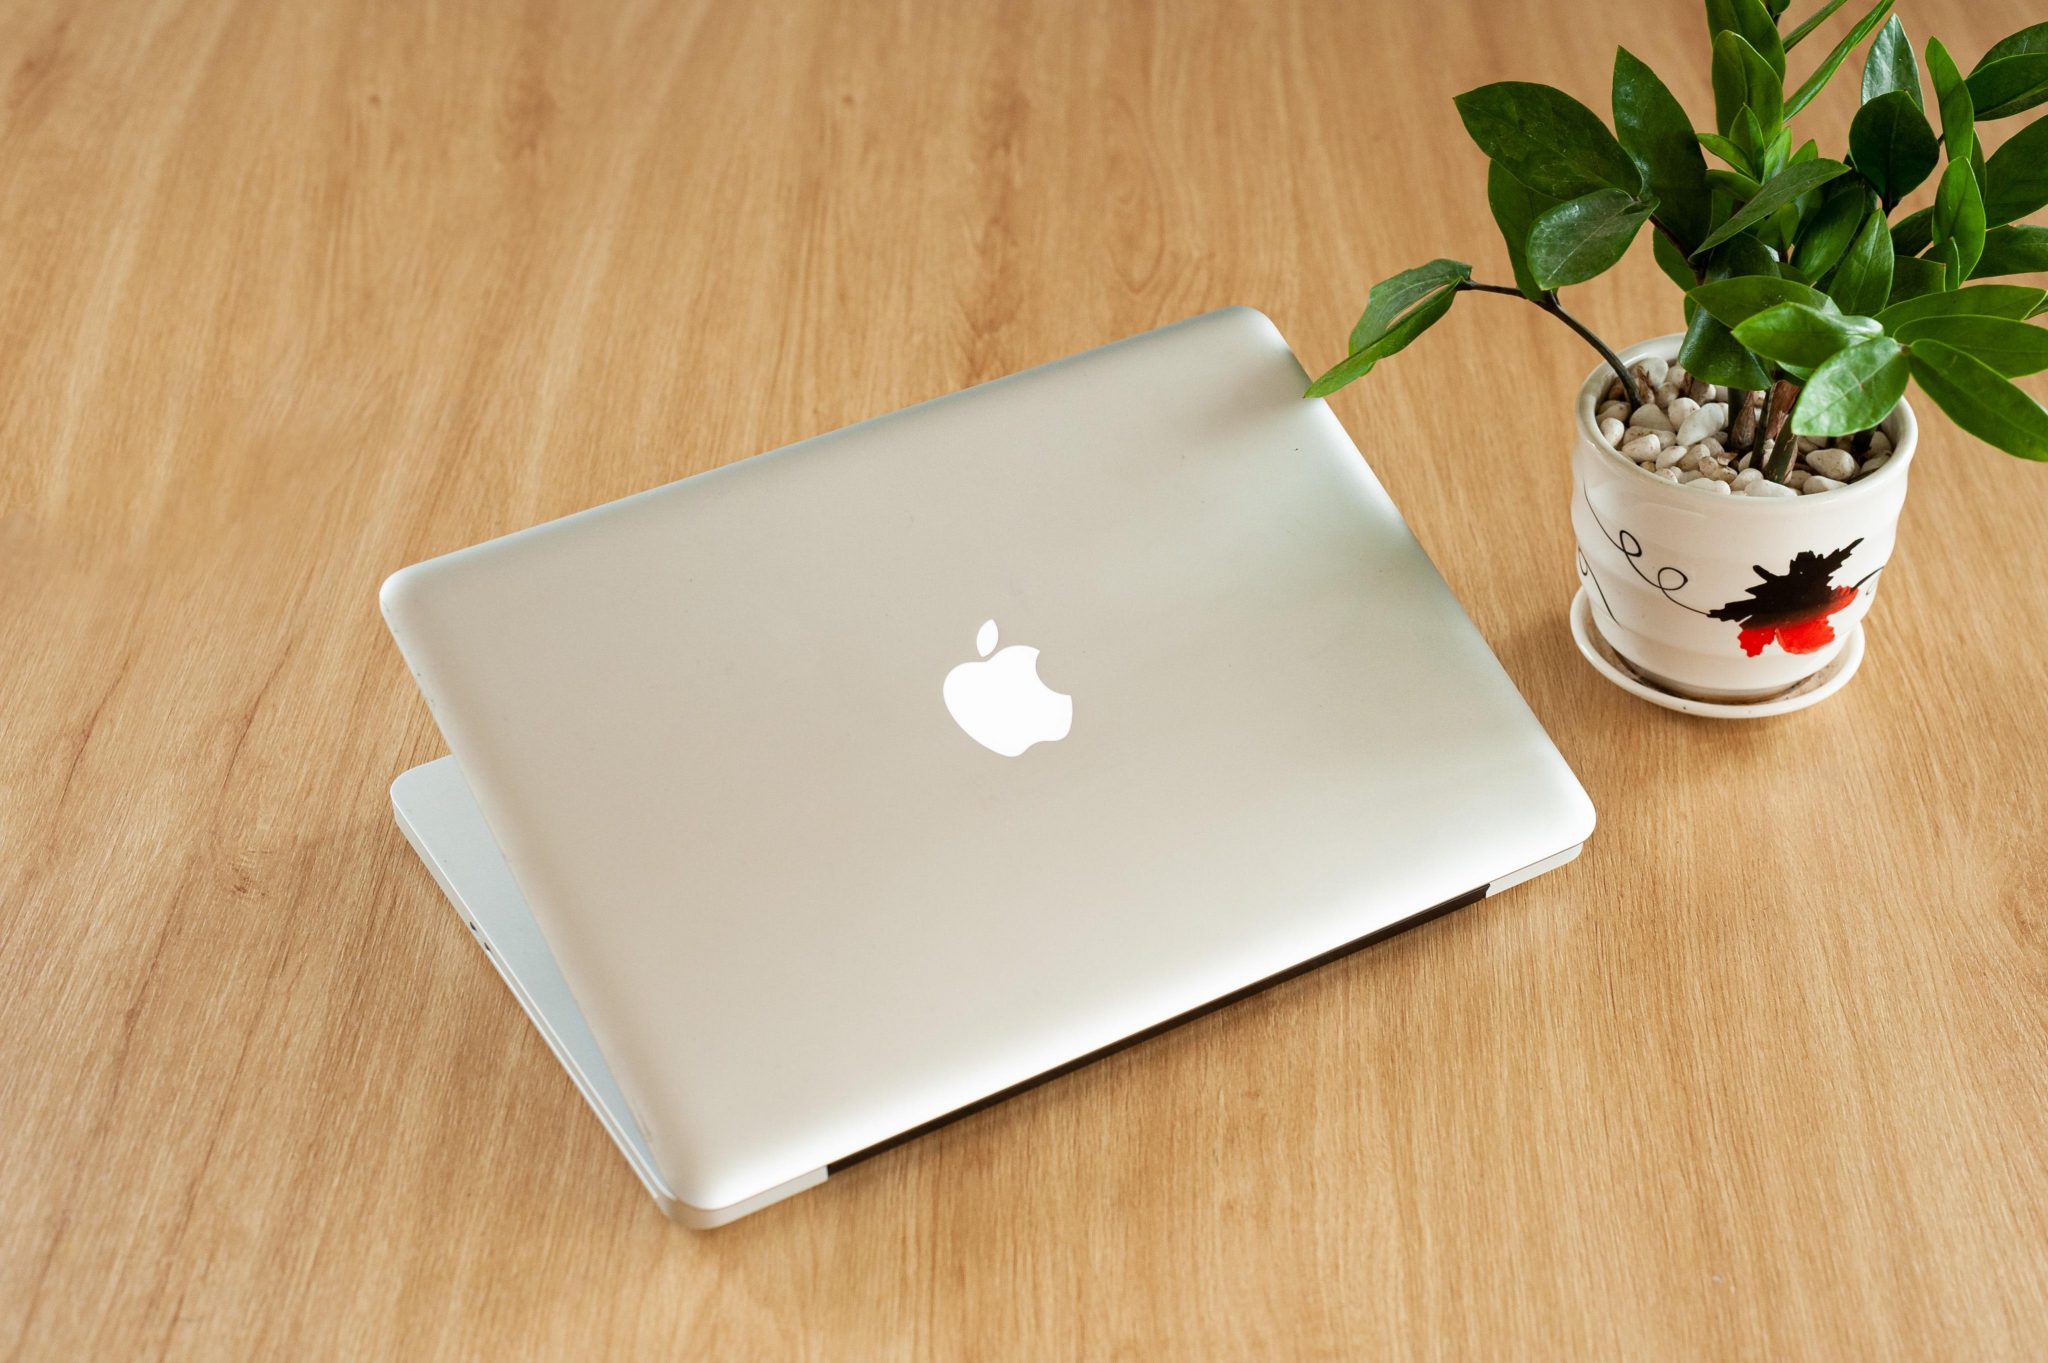 A MacBook and a plant